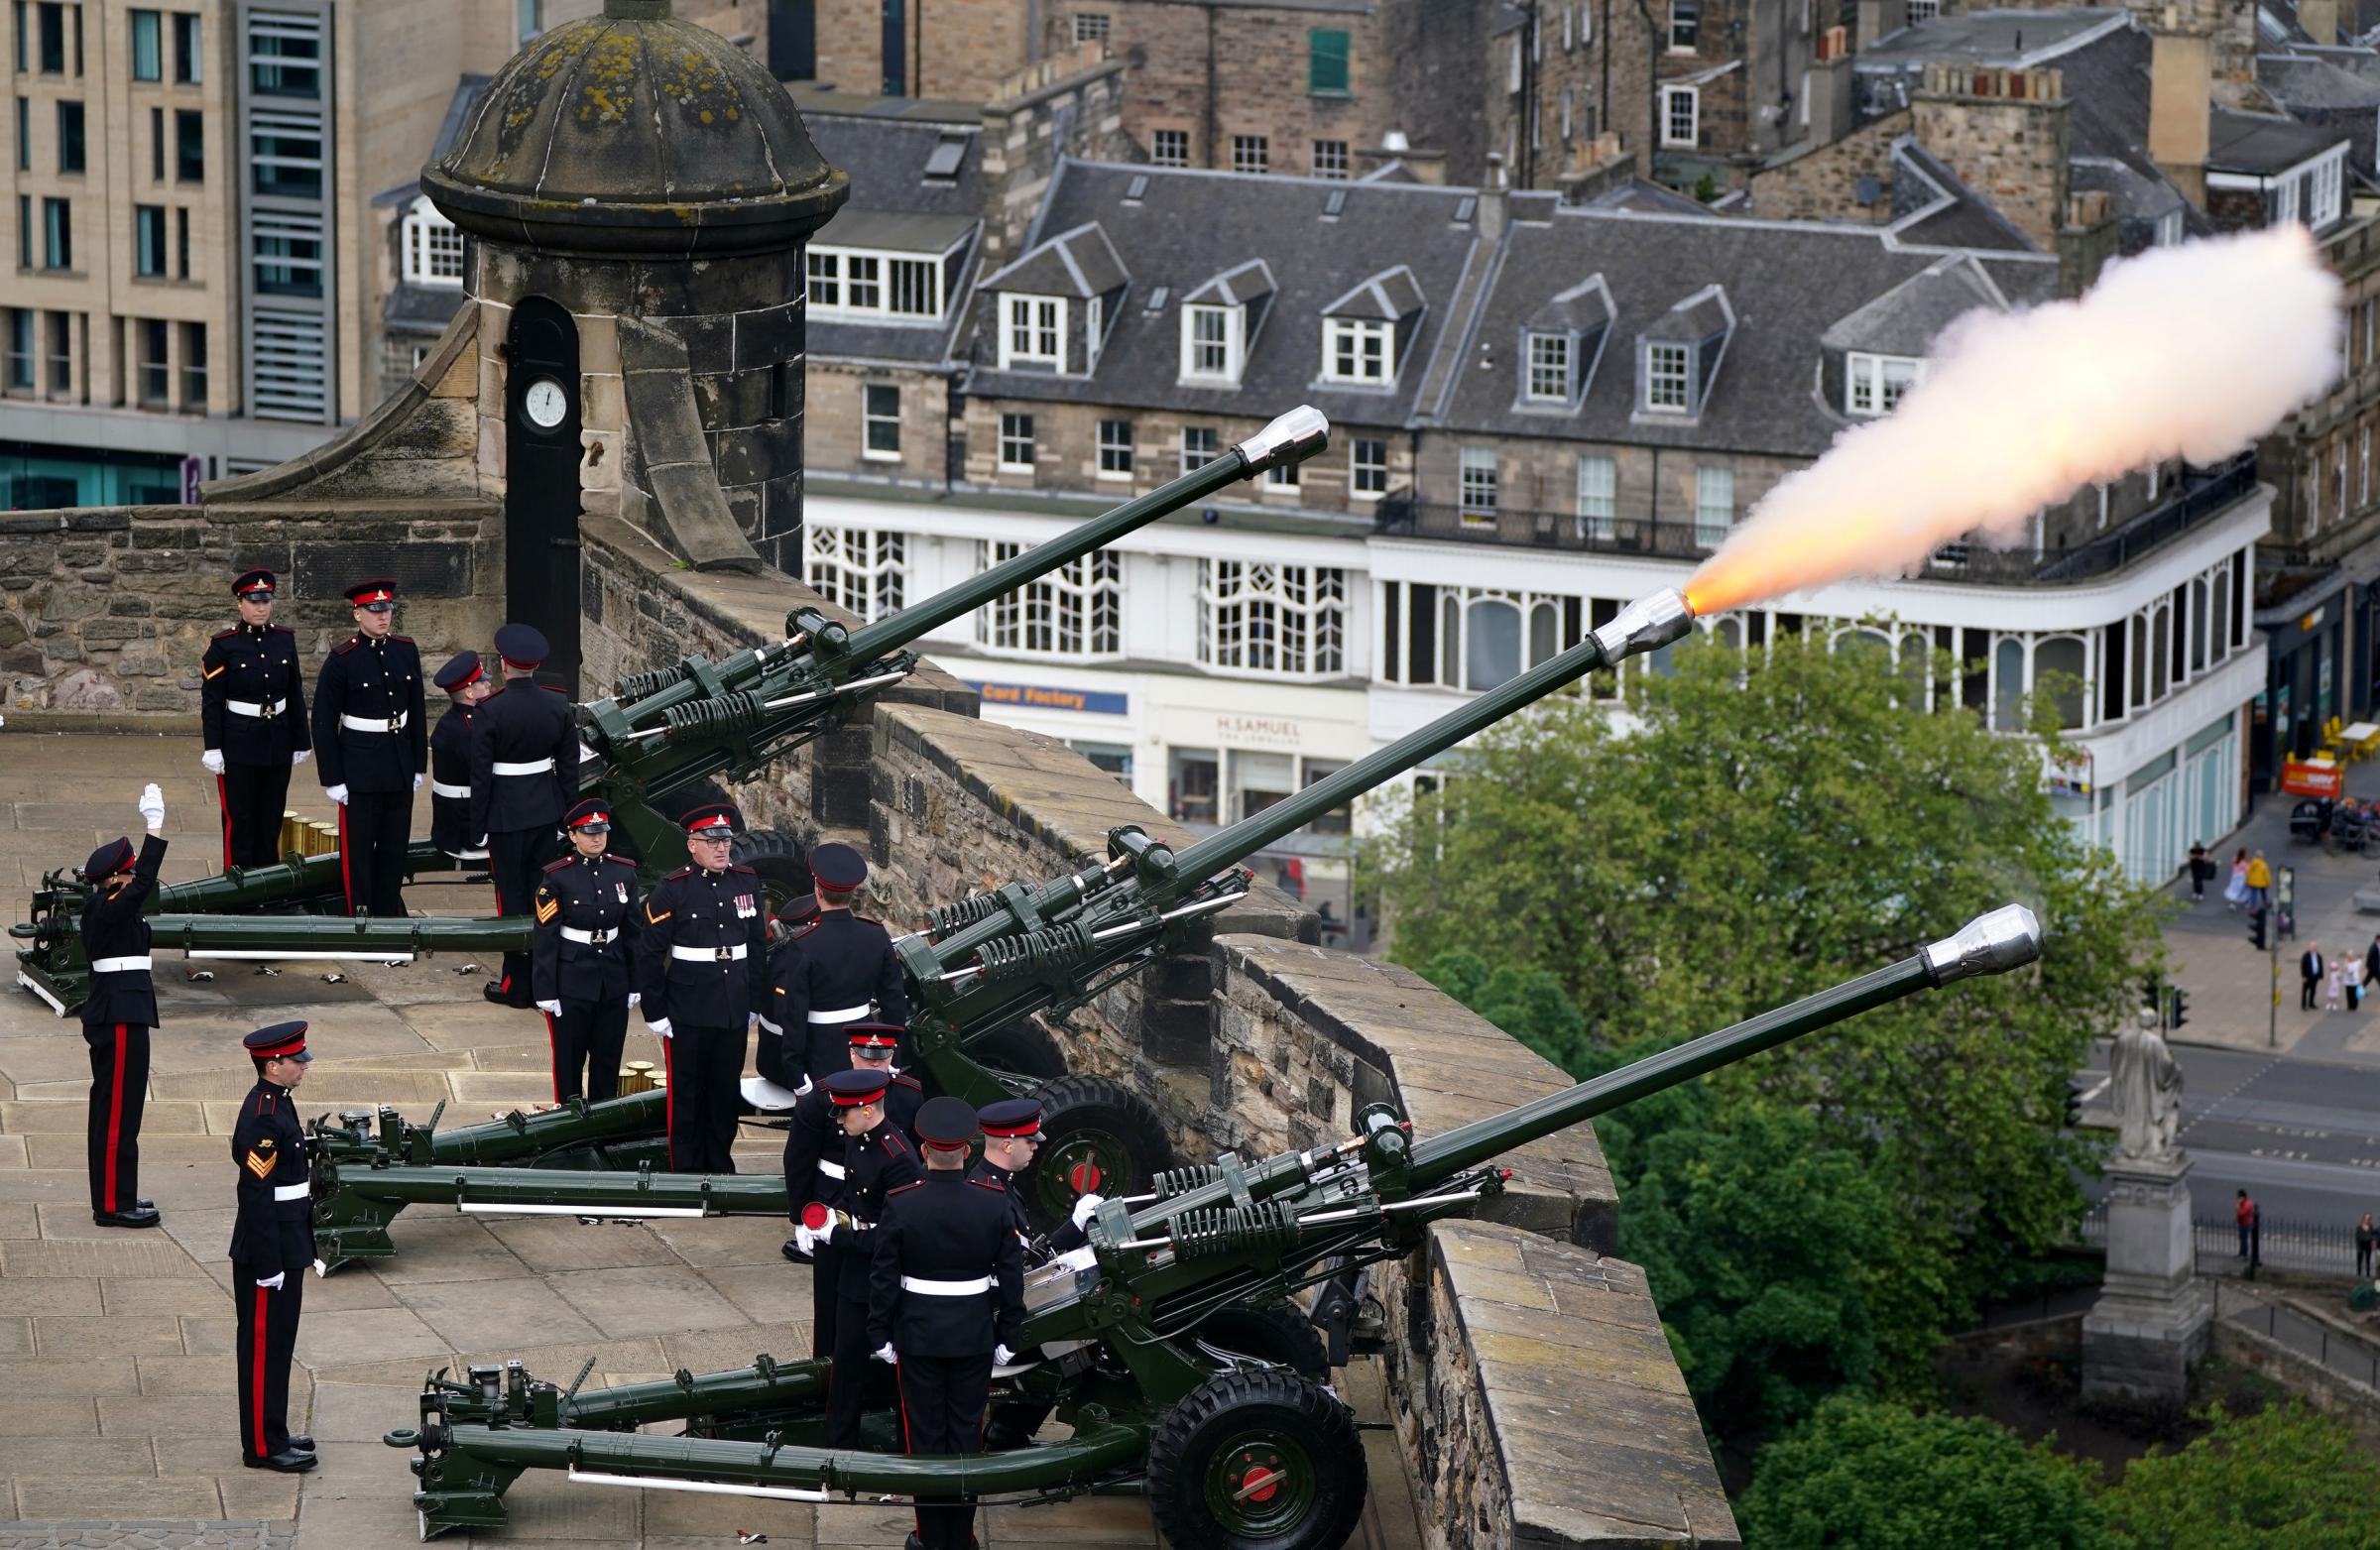 The 105th Regiment Royal Artillery, The Scottish and Ulster Gunners during the Royal Gun Salute at Edinburgh Castle to mark the start of the Platinum Jubilee celebratory weekend. Photo credit: Andrew Milligan/PA Wire